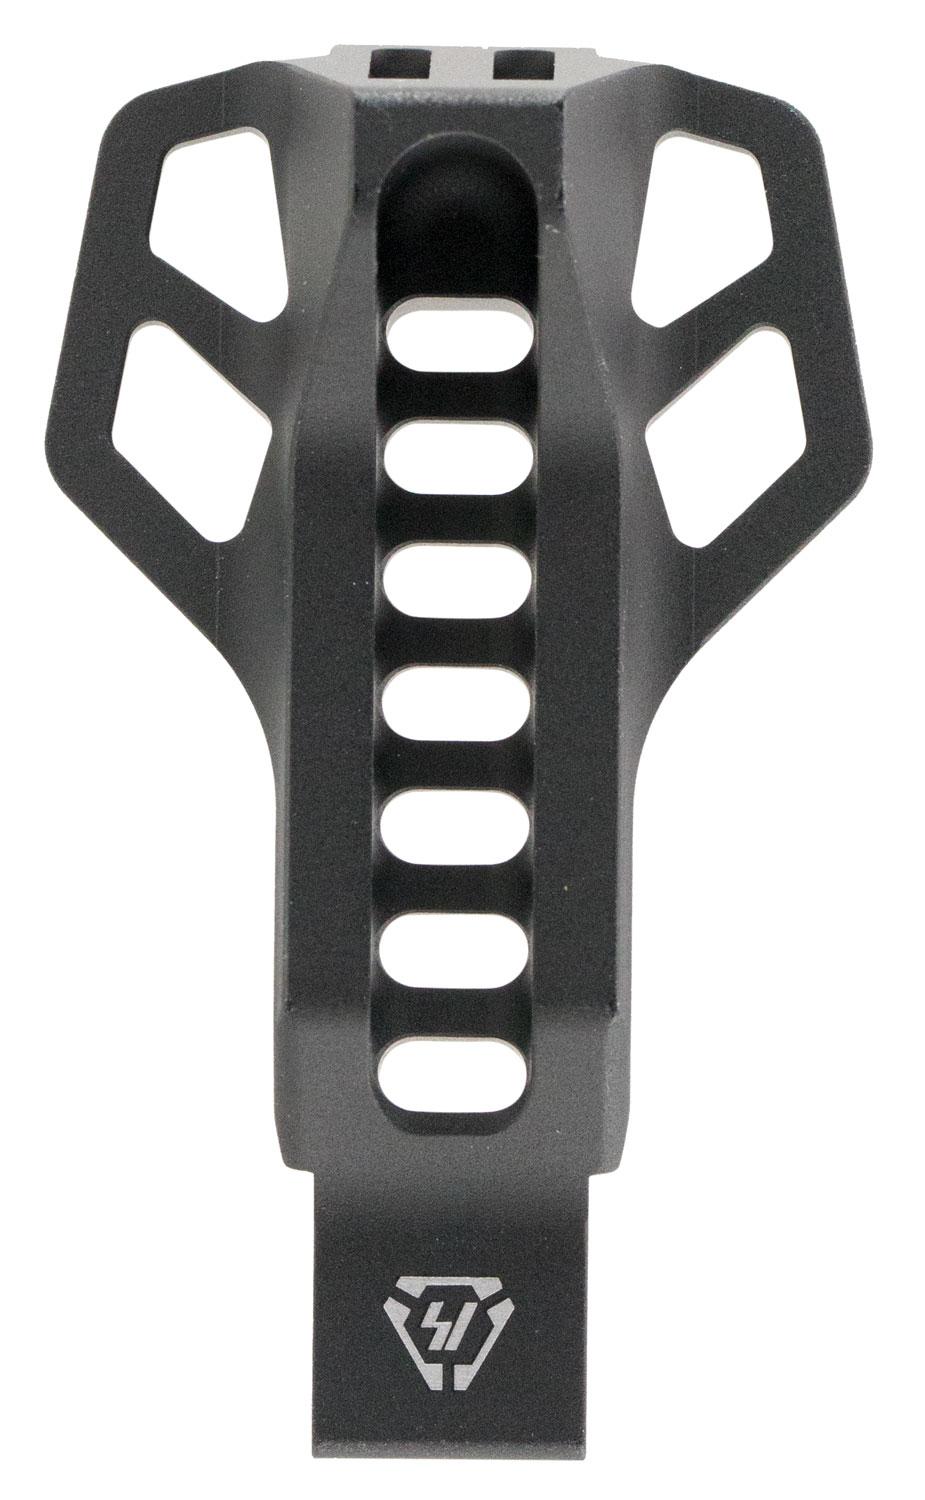 Strike Industries Cobra AR Trigger Guard Black - Shooting Supplies And Accessories at Academy Sports